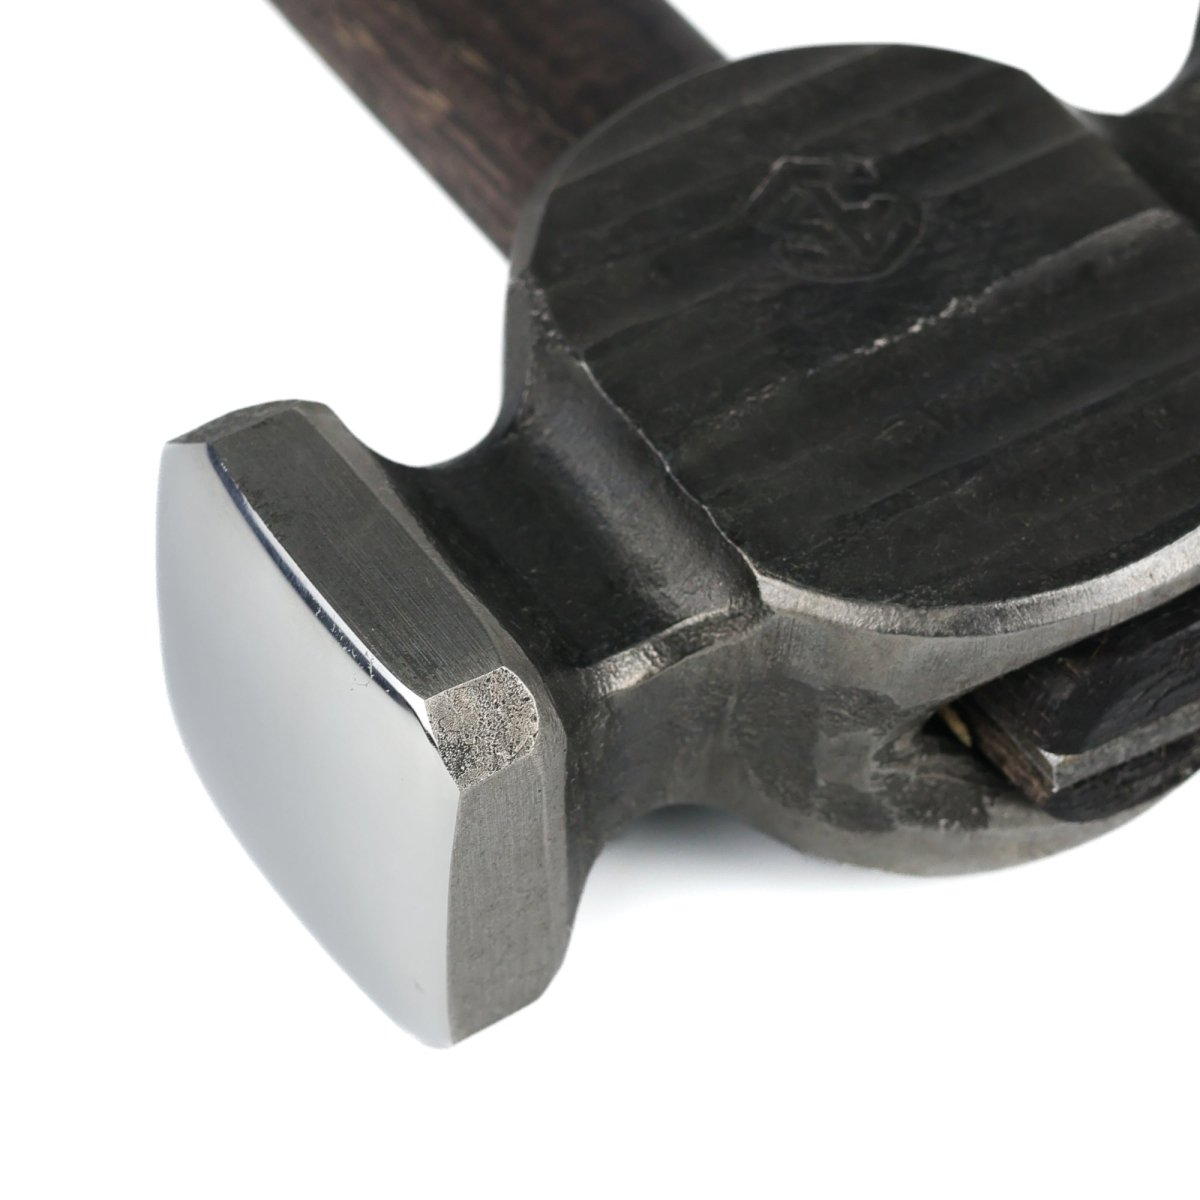 Square Circle Rounding Hammer for blacksmithing from AncientSmithy